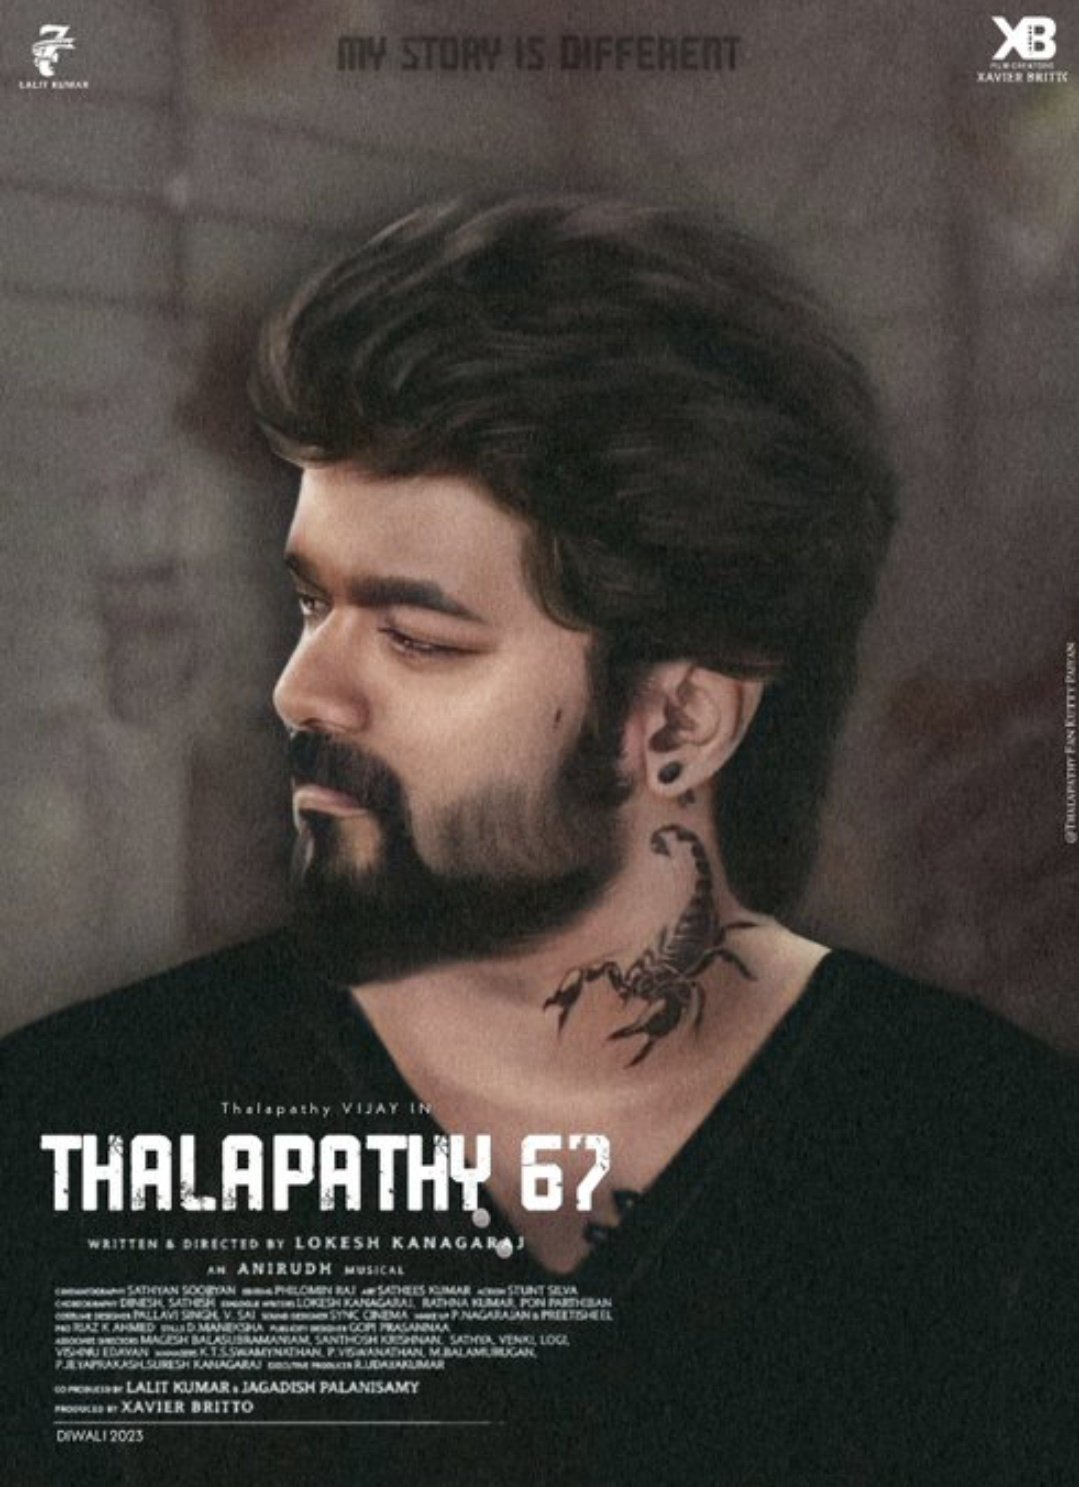 Thalapathy-pic # | New photos hd, Actor picture, Baby tattoo designs